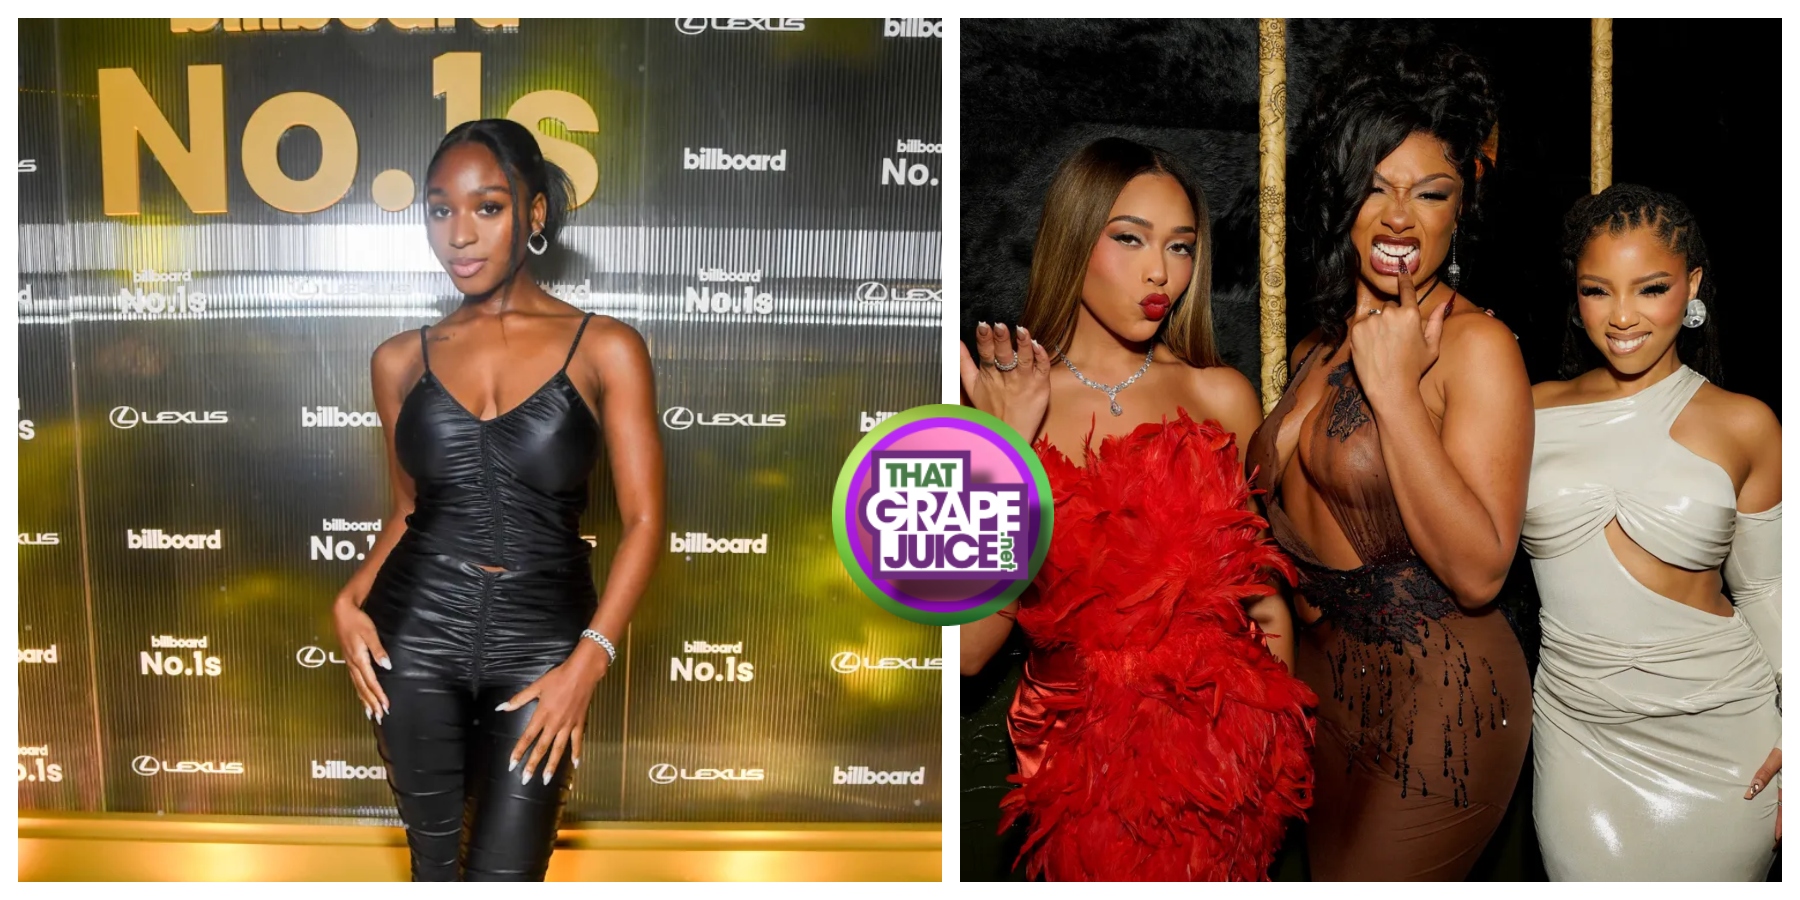 Normani, Chloe Bailey, & Megan Thee Stallion Stun at GQ Men of the Year, Billboard’s ‘No.1s’ Party, & More [Photos]